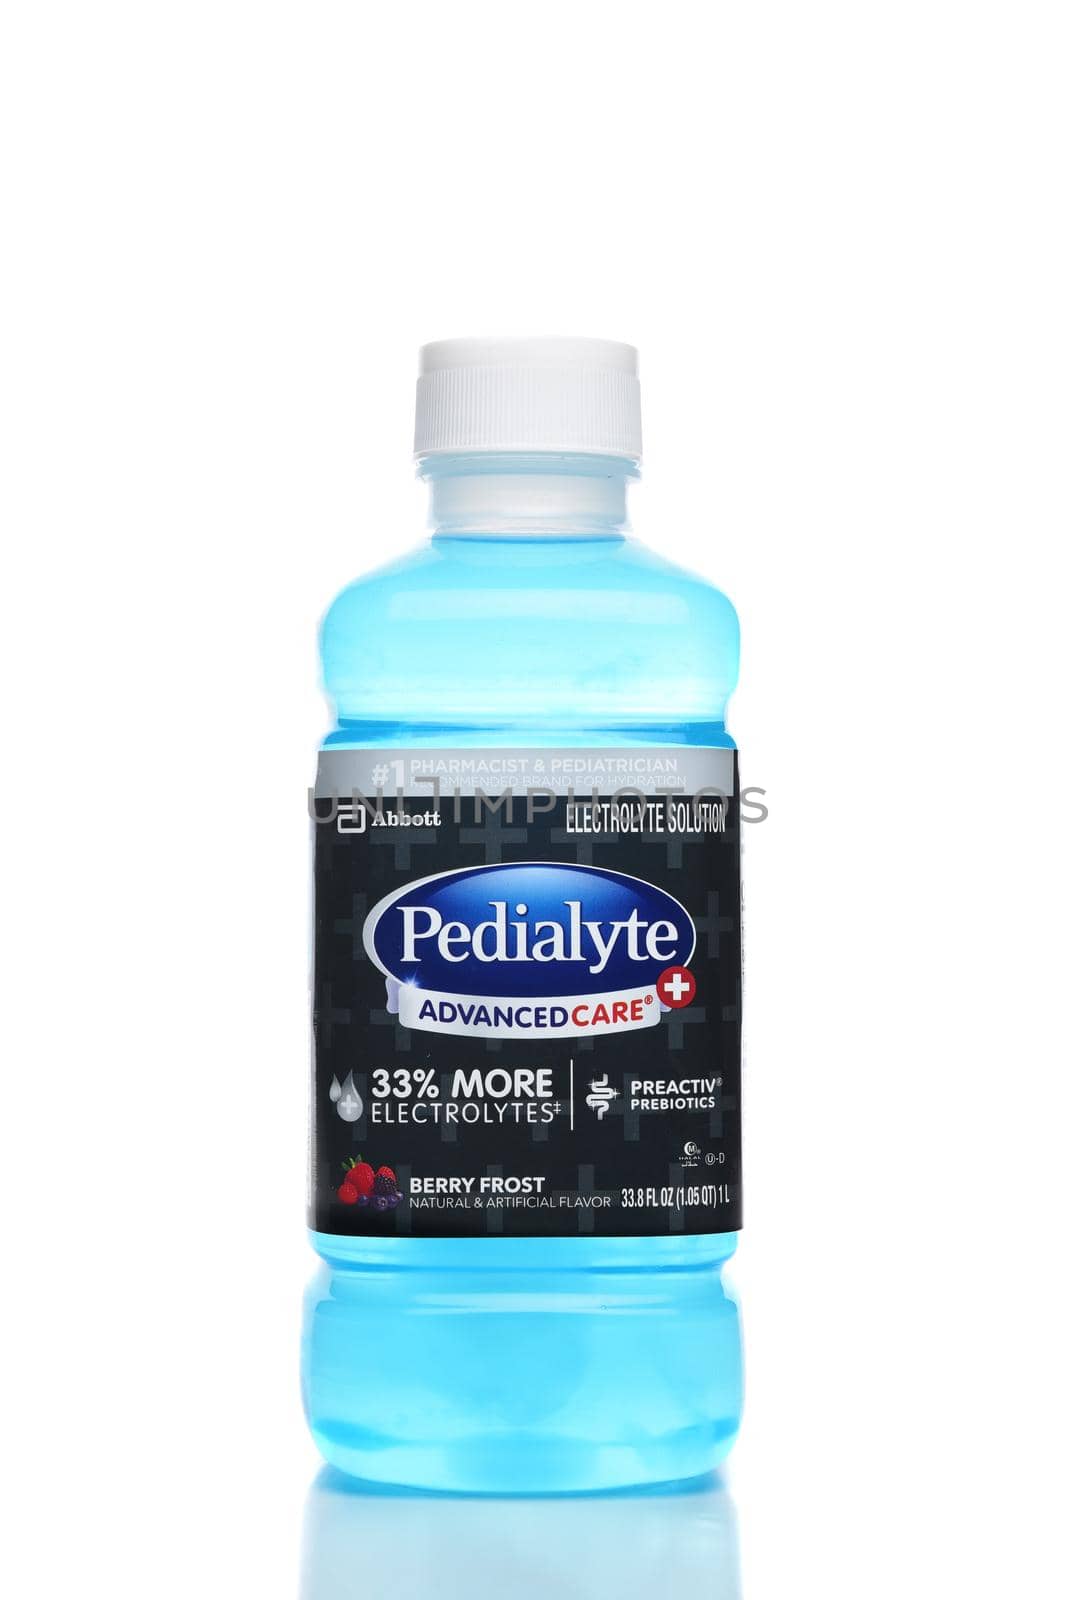 IRVINE, CALIFORNIA - 21 DEC 2020: A bottle of Pedialyte Advanced Care Electrolyte Solution, Berry Frost Flavor. by sCukrov